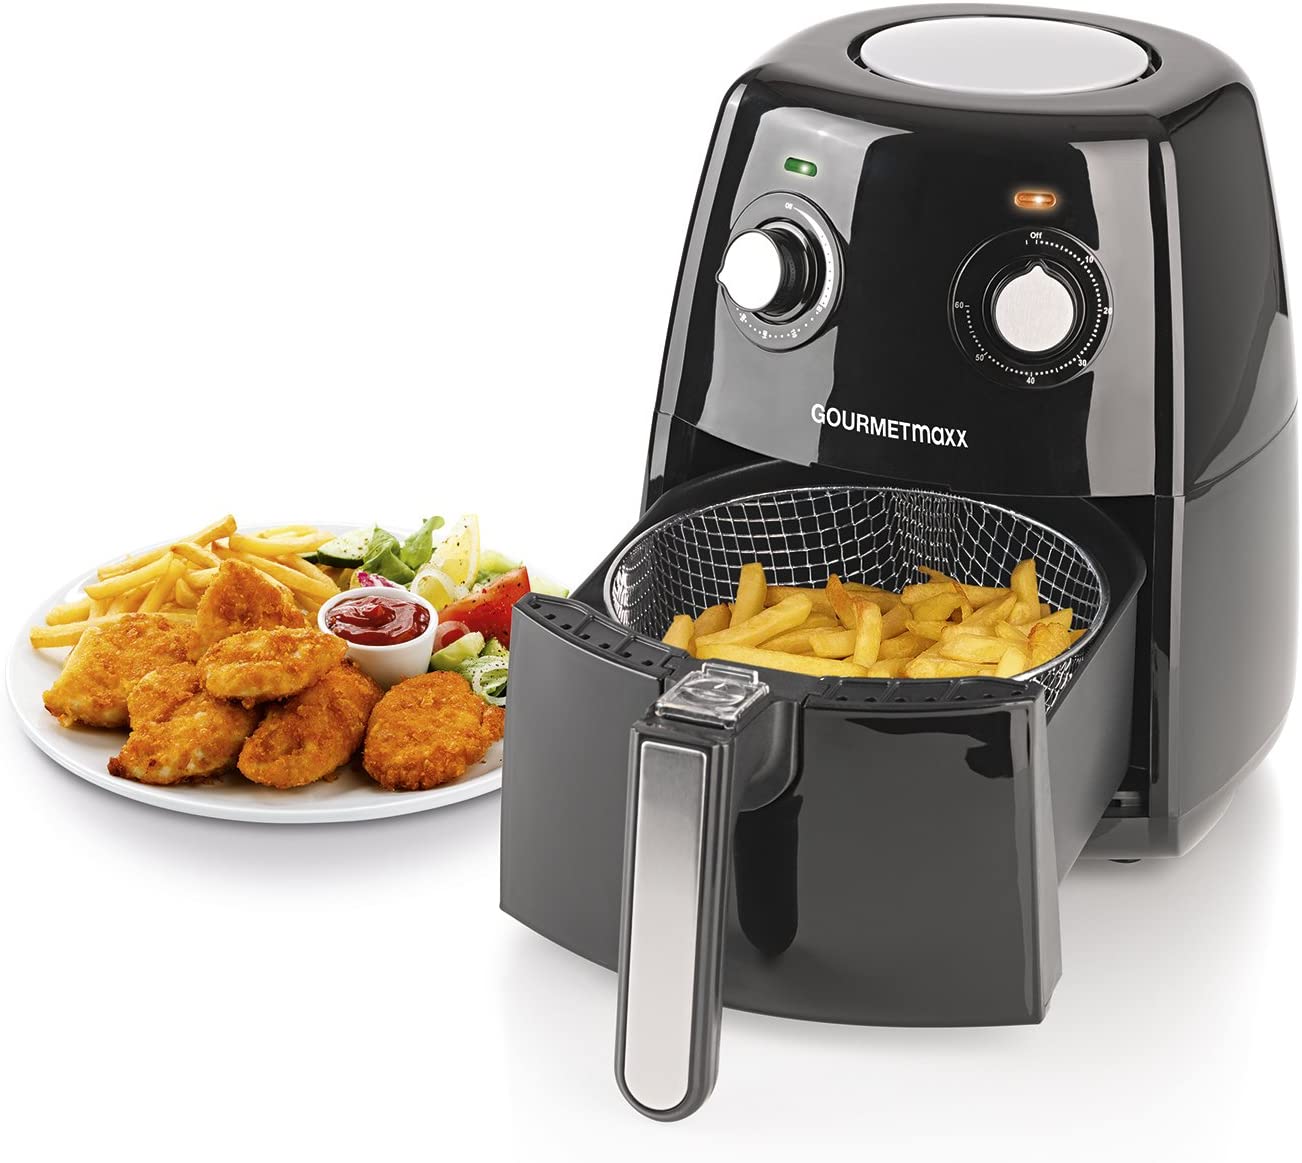 GOURMETmaxx Deep Fryer with XL Basket | Hot Air Fryer without Fat | Hot Air Oven for Low Fat Frying | Timer and Temperature Control [Black/2.5 Litre]